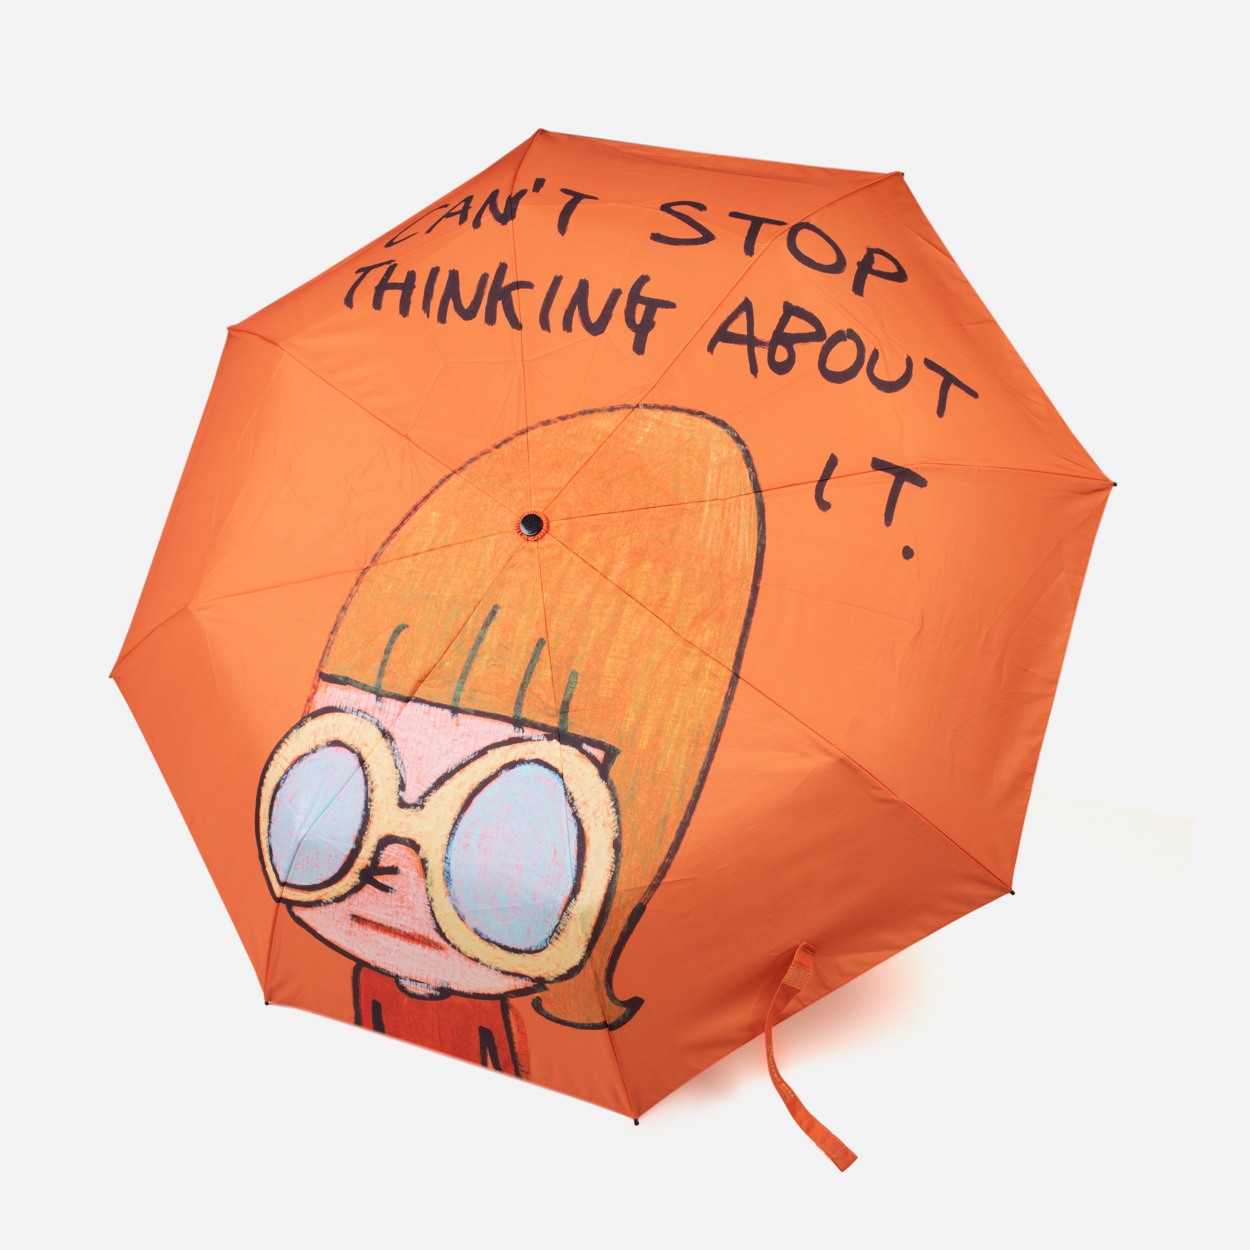 Umbrella Can't Stop Thinking about It, 2011